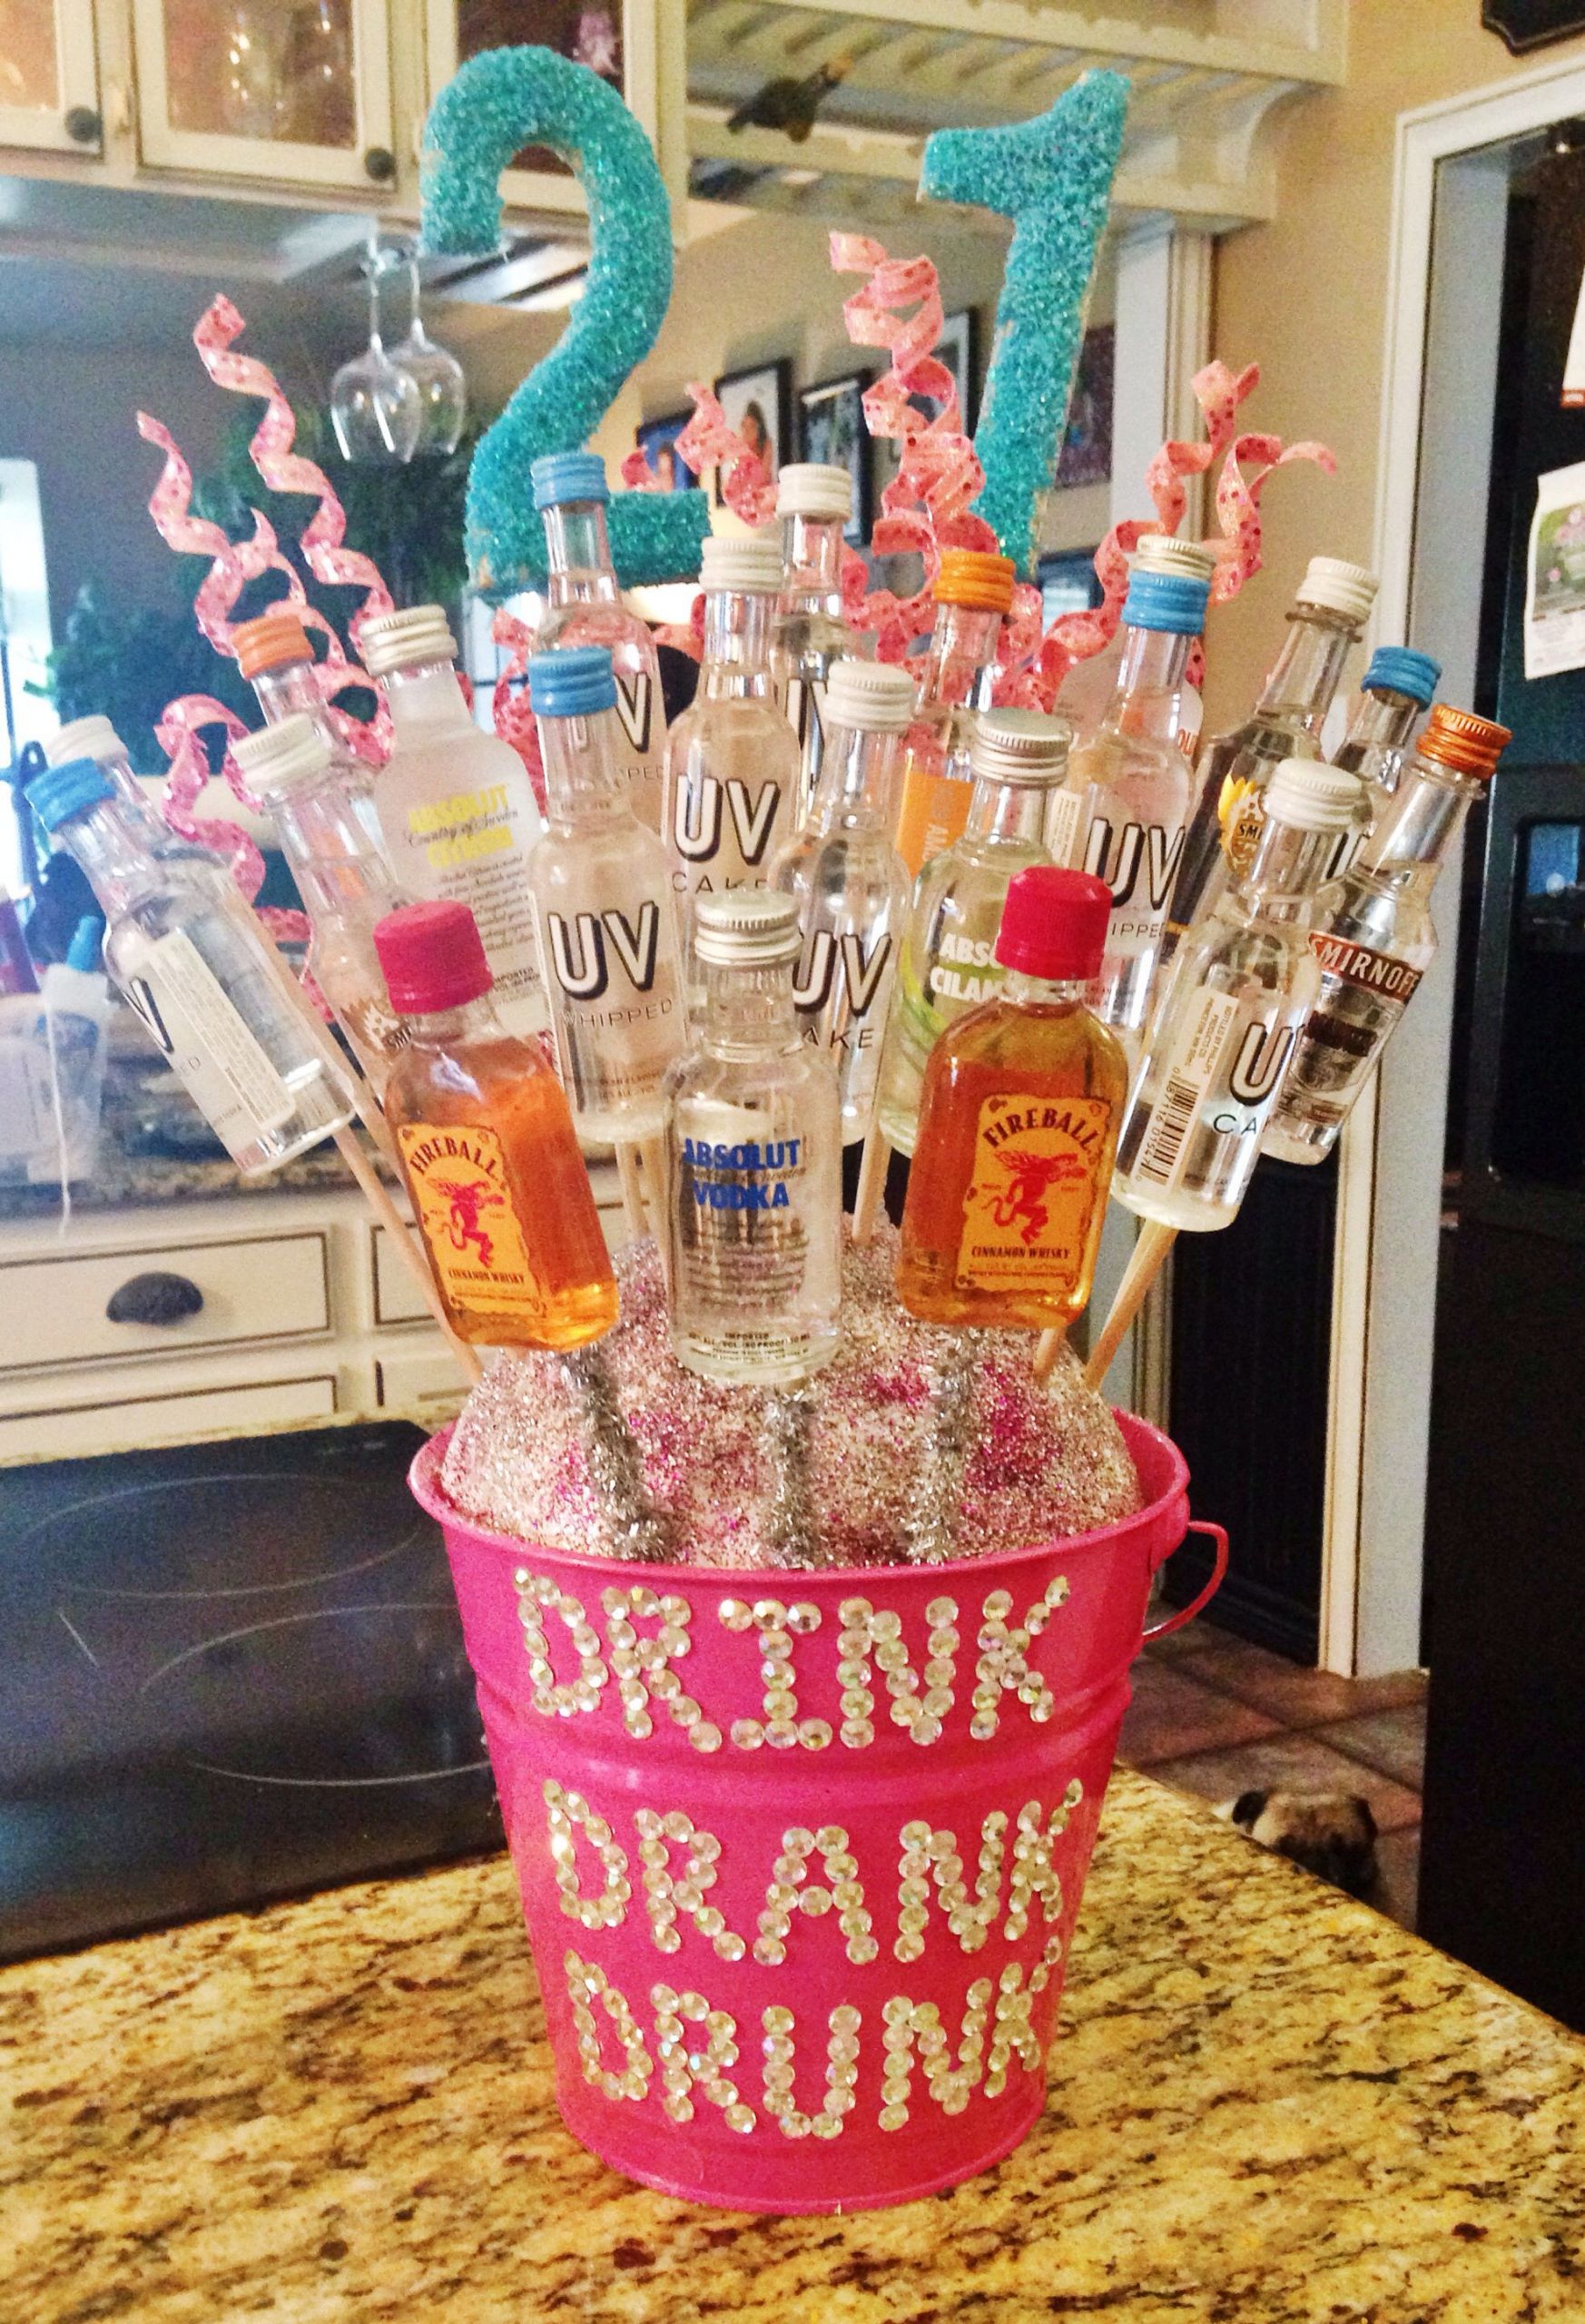 21St Anniversary Gift Ideas
 21st alcohol bouquet I made for my best friend